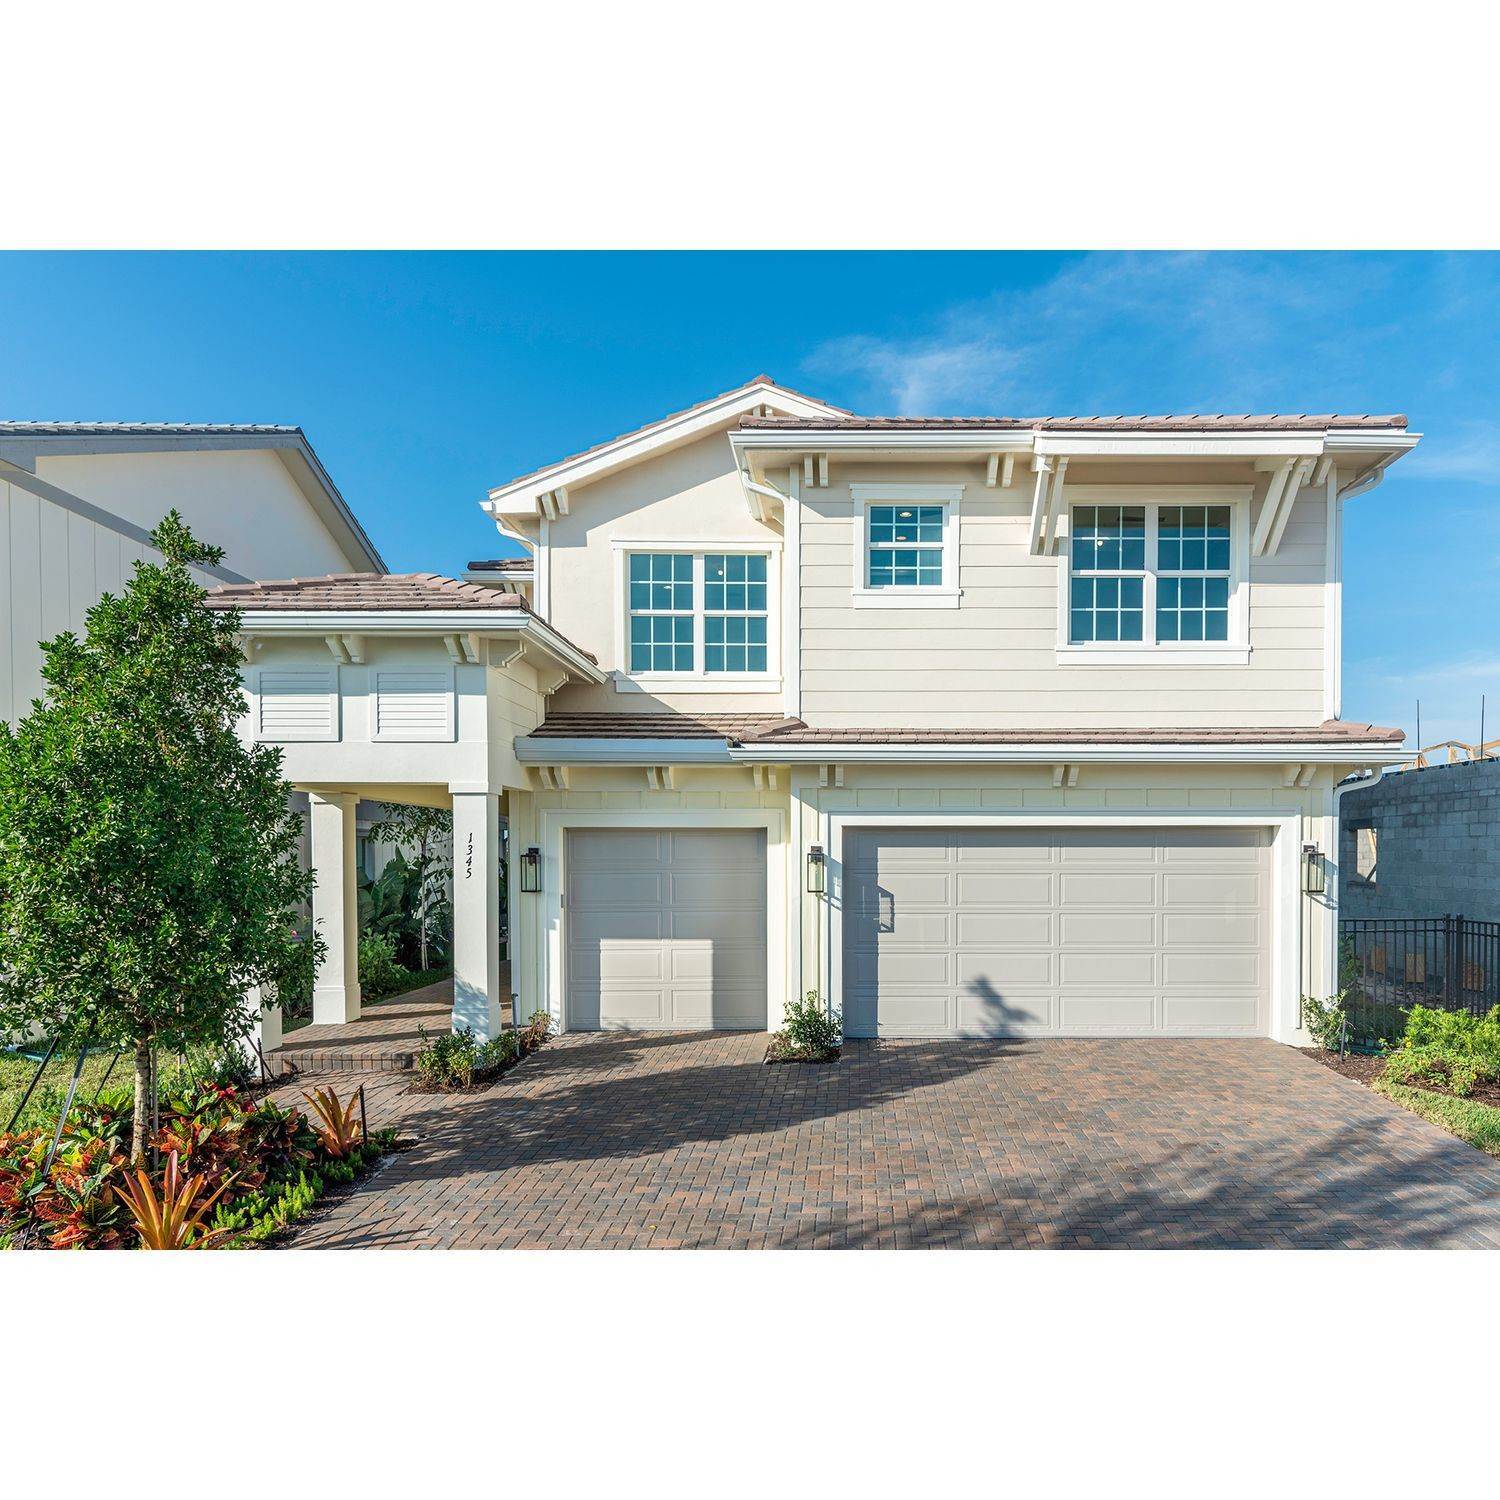 Single Family for Sale at Loxahatchee, FL 33470